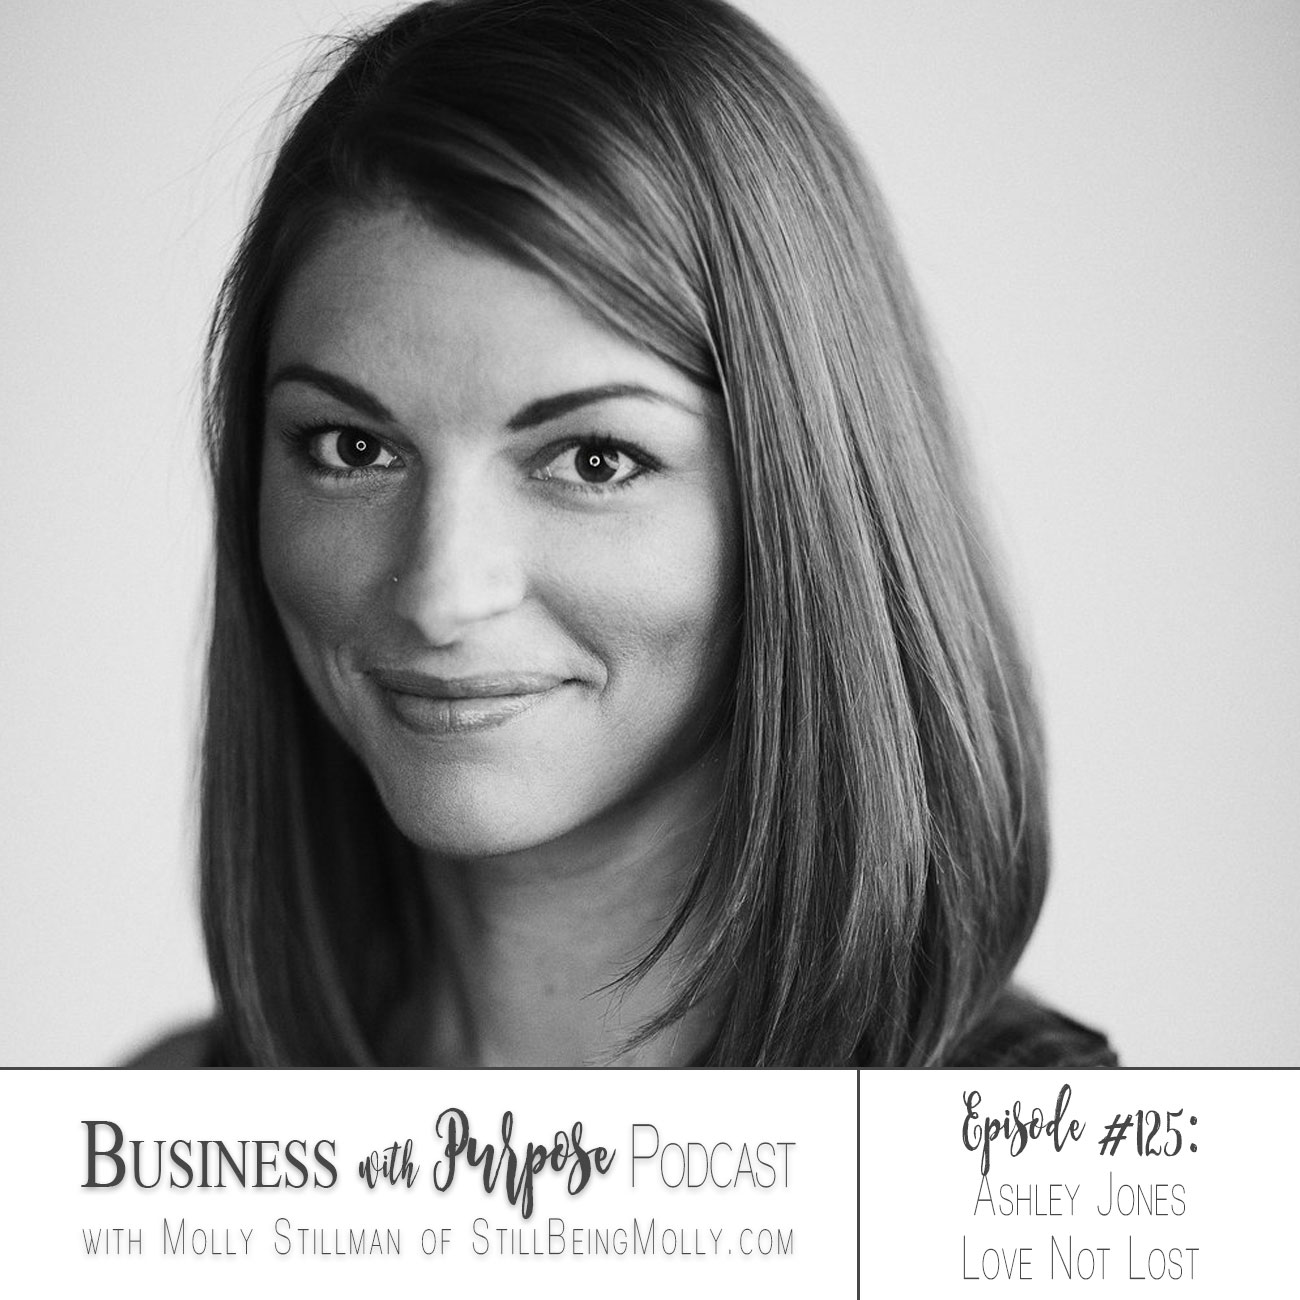 Business with Purpose Podcast EP 125: Ashley Jones, Love Not Lost